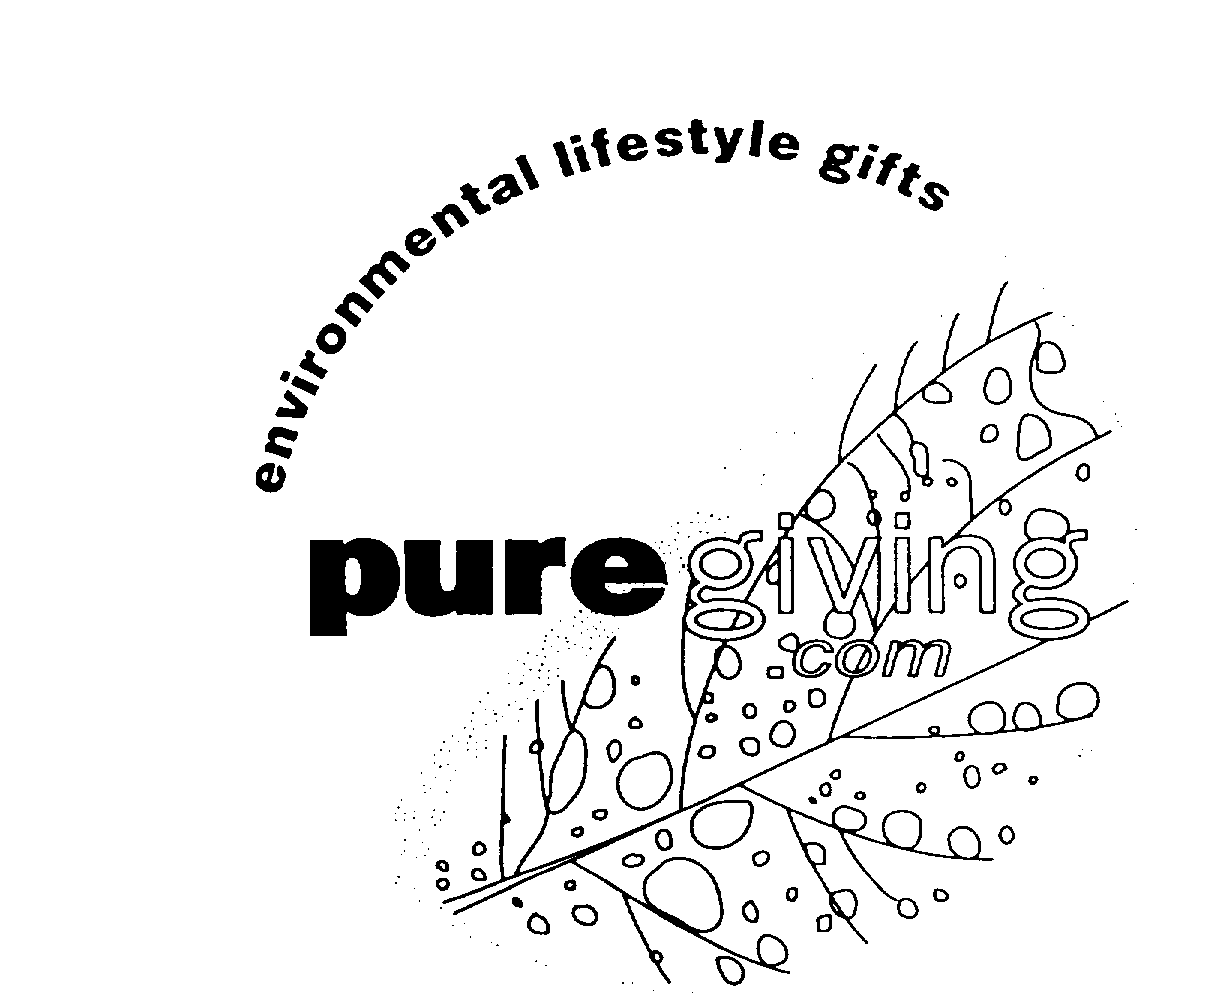  PURE GIVING.COM ENVIRONMENTAL LIFESTYLE GIFTS